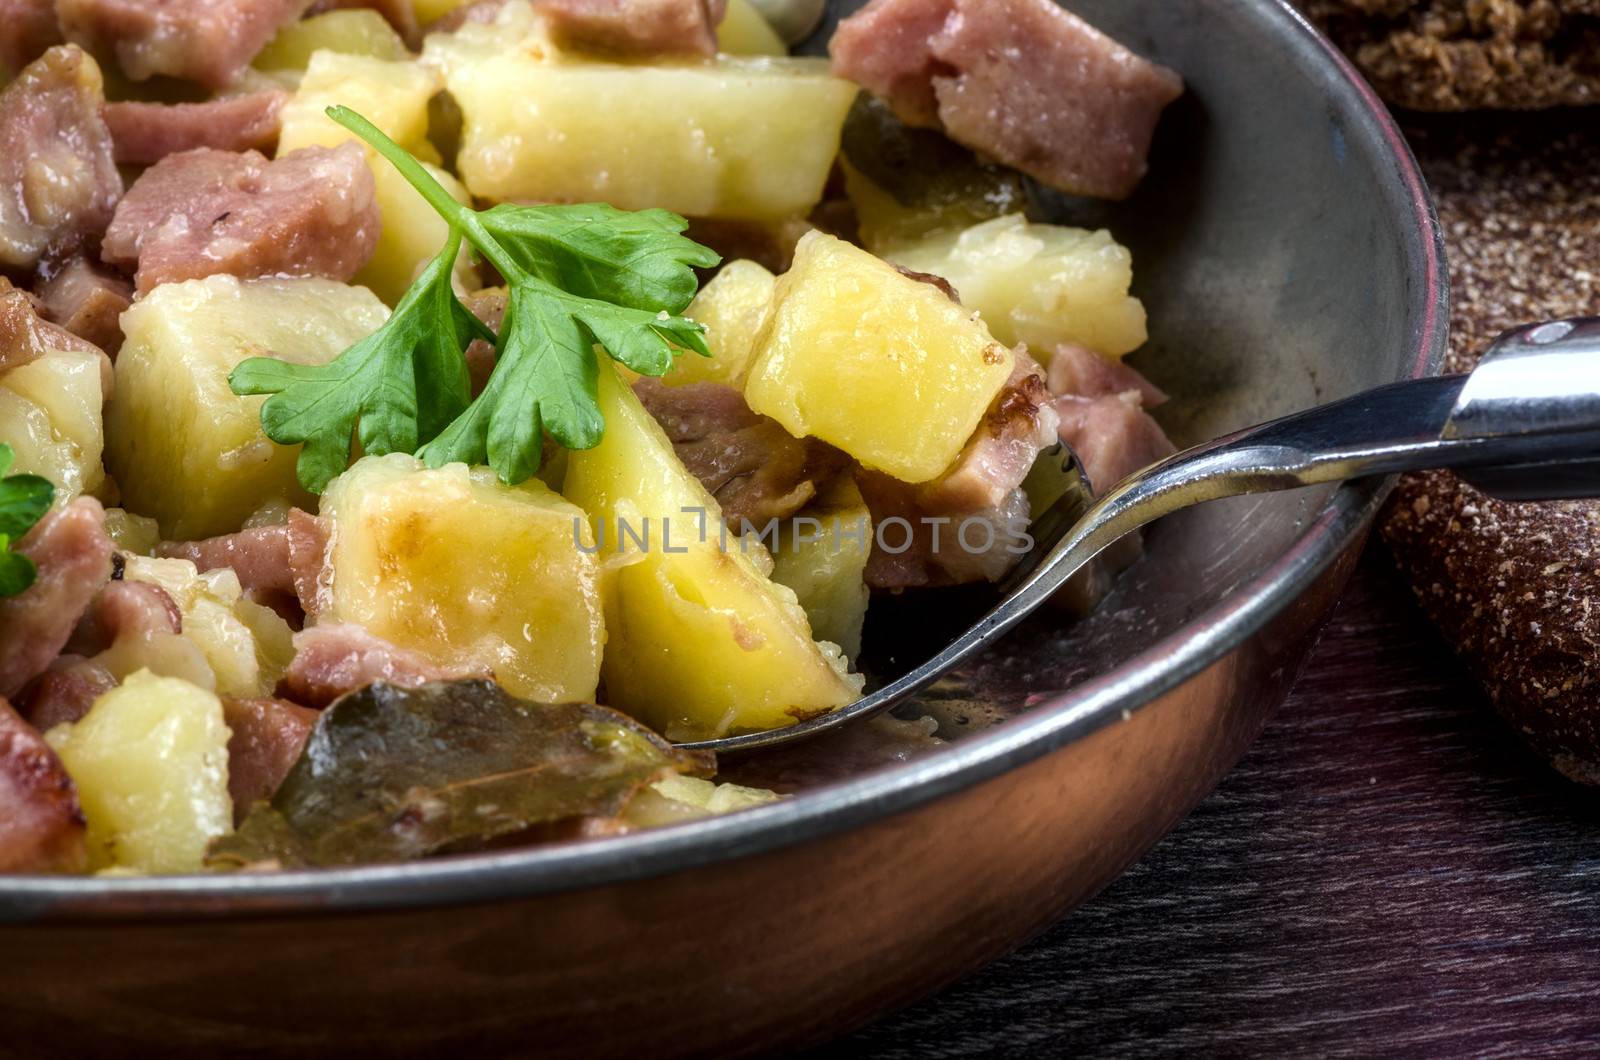 Fried potato with meat by maisicon